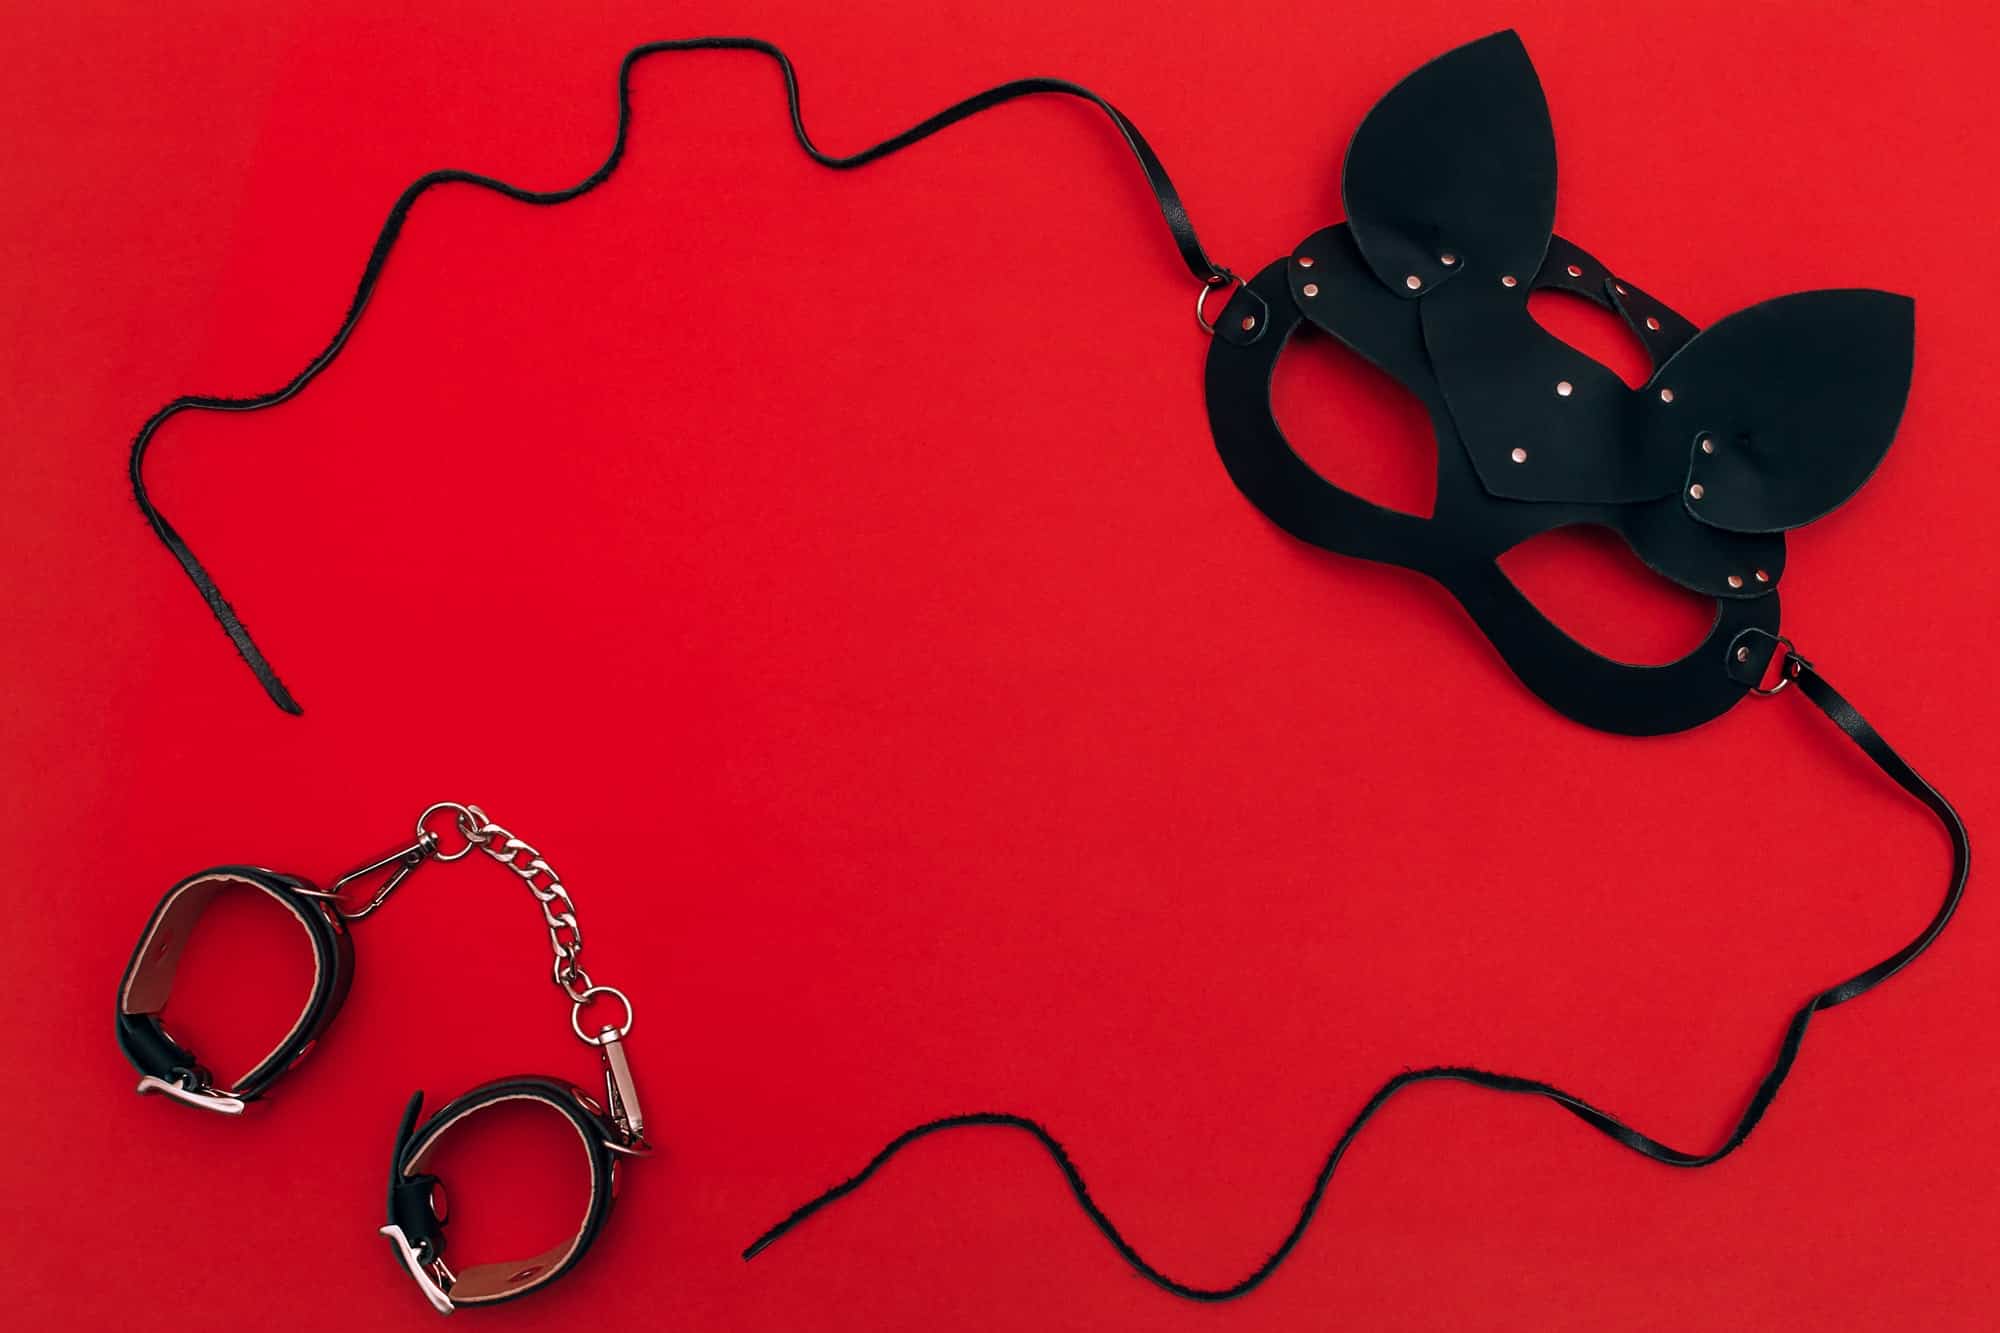 Black leather cat mask on a red background.Concept of Valentine's Day, BDSM communities